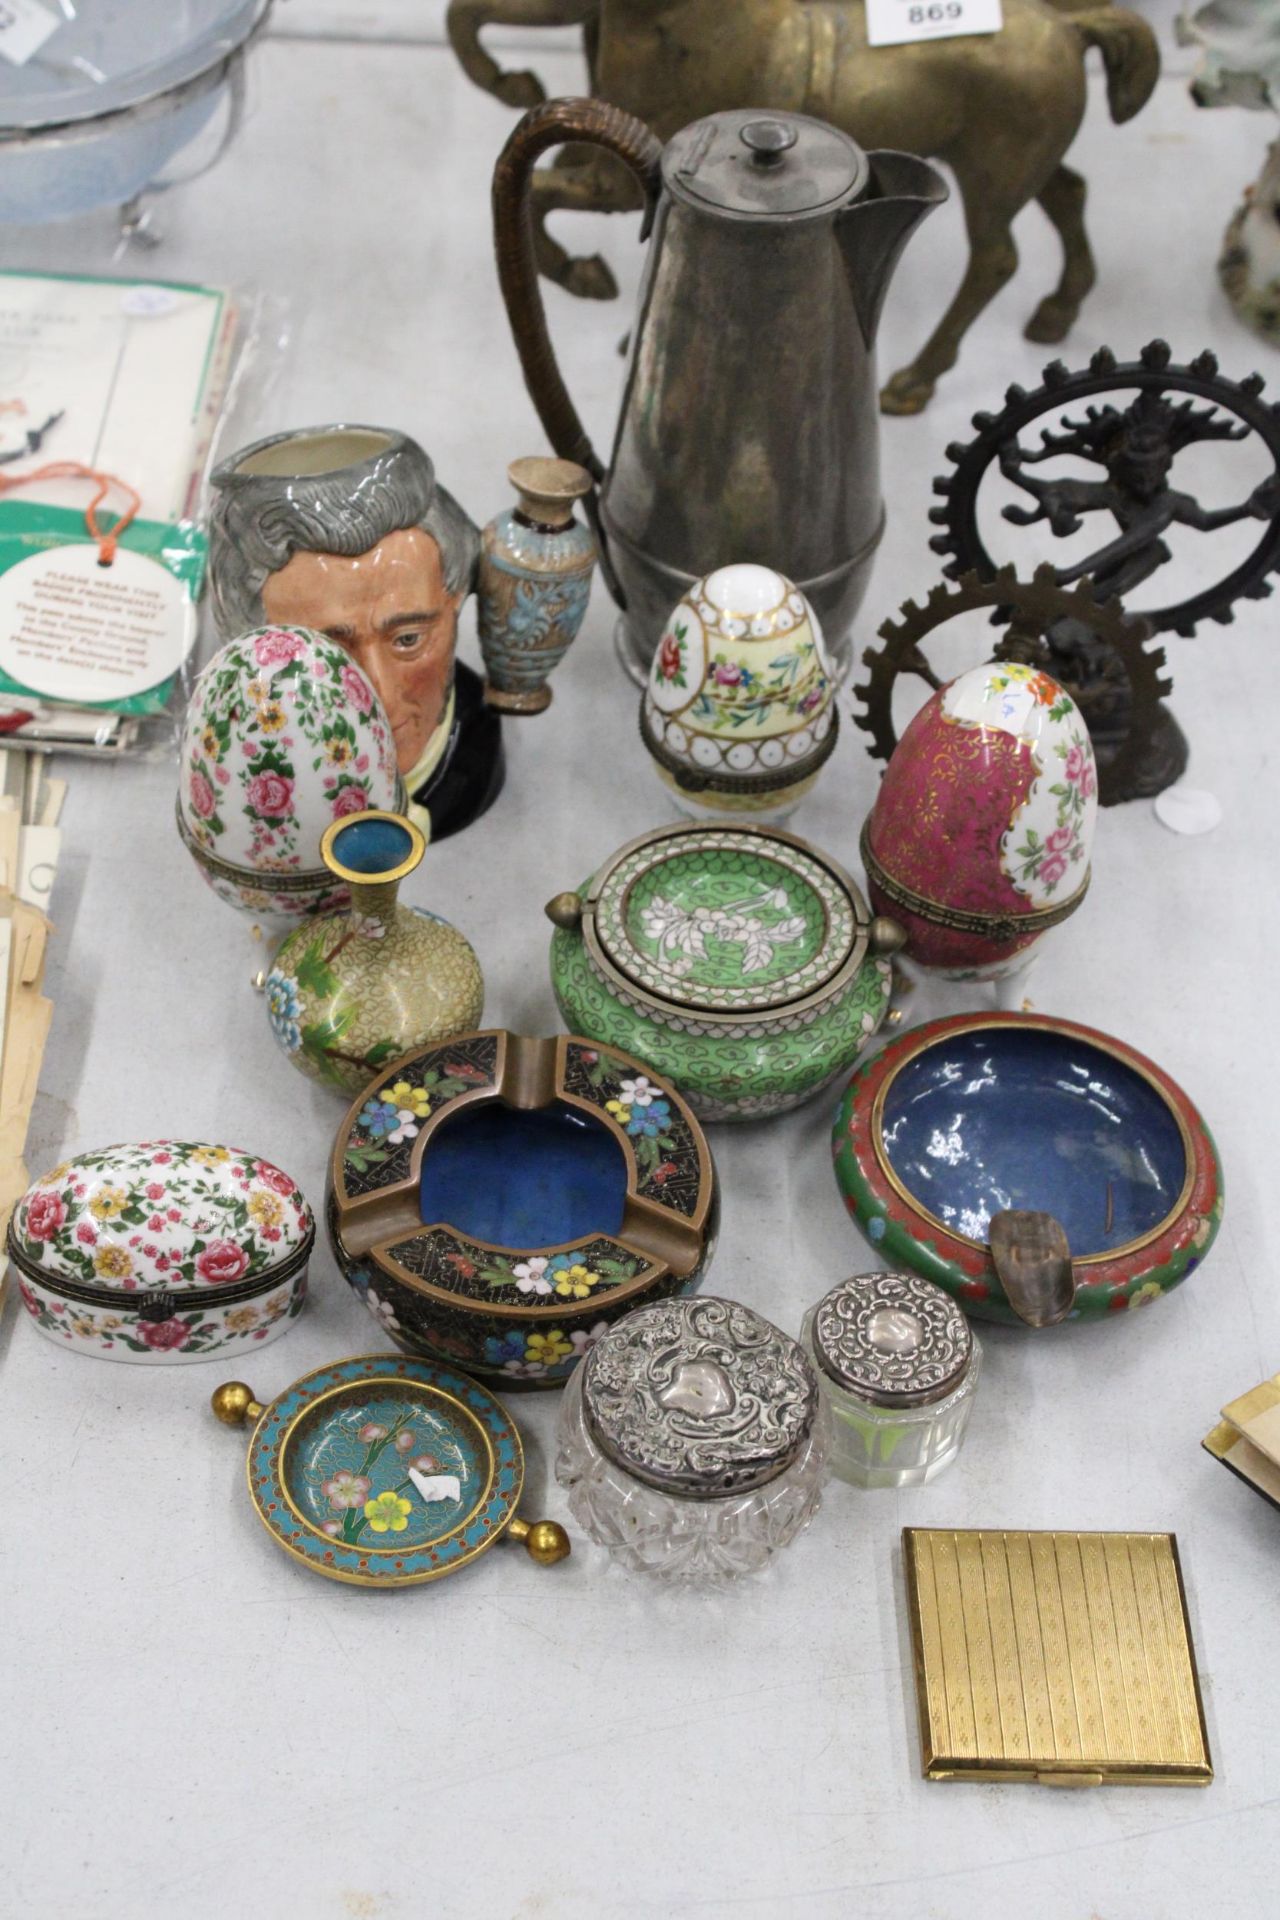 A MIXED LOT TO INCLUDE TWO SILVER LIDDED POTS, CLOISONNE BOWLS, PORCELAIN EGG SHAPED TRINKET